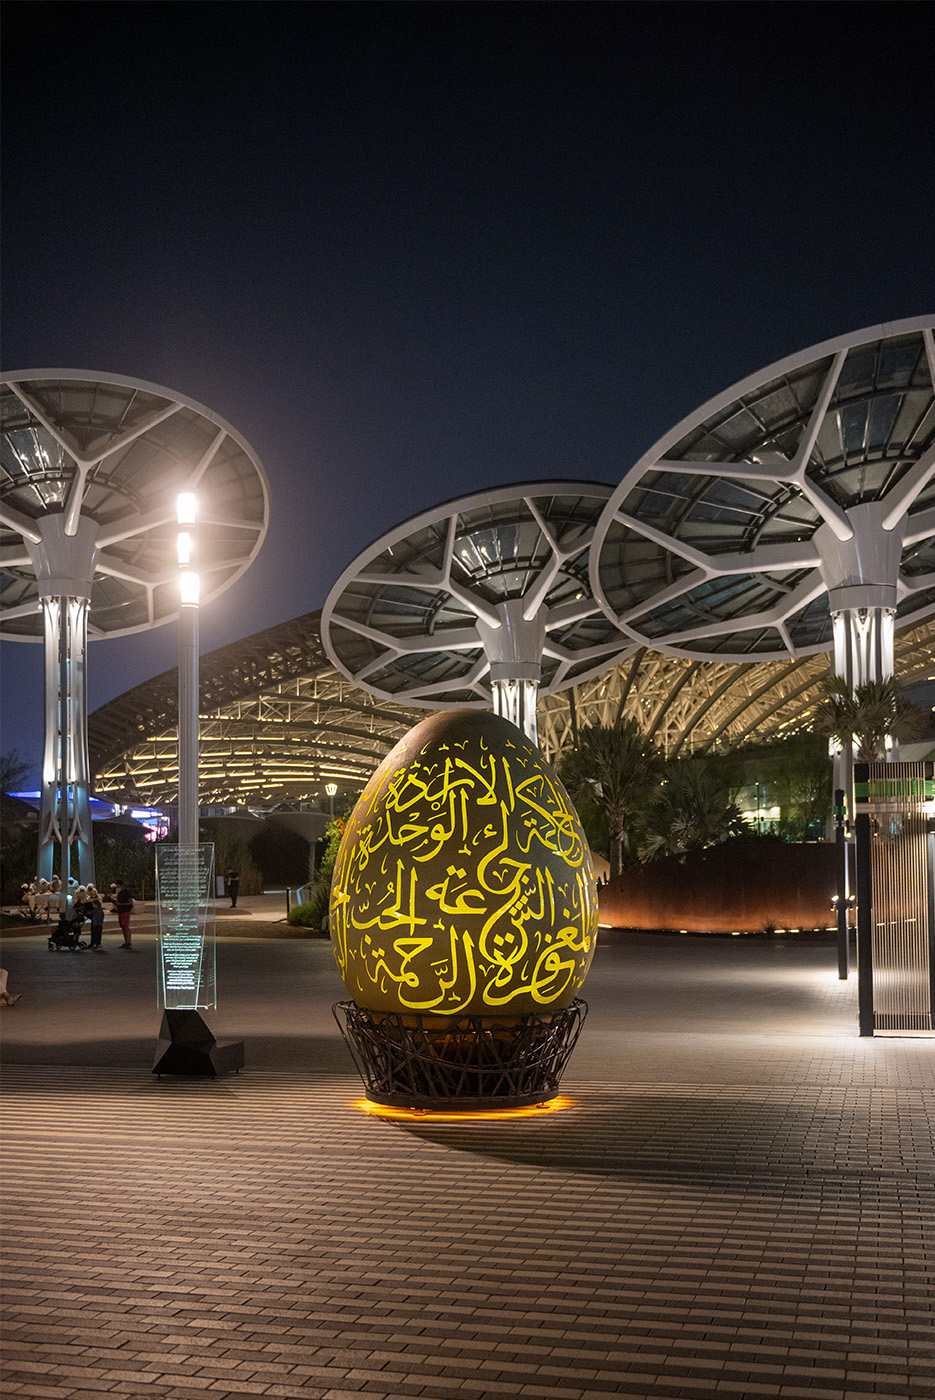 An egg sculpture with arabic script in the courtyard at night